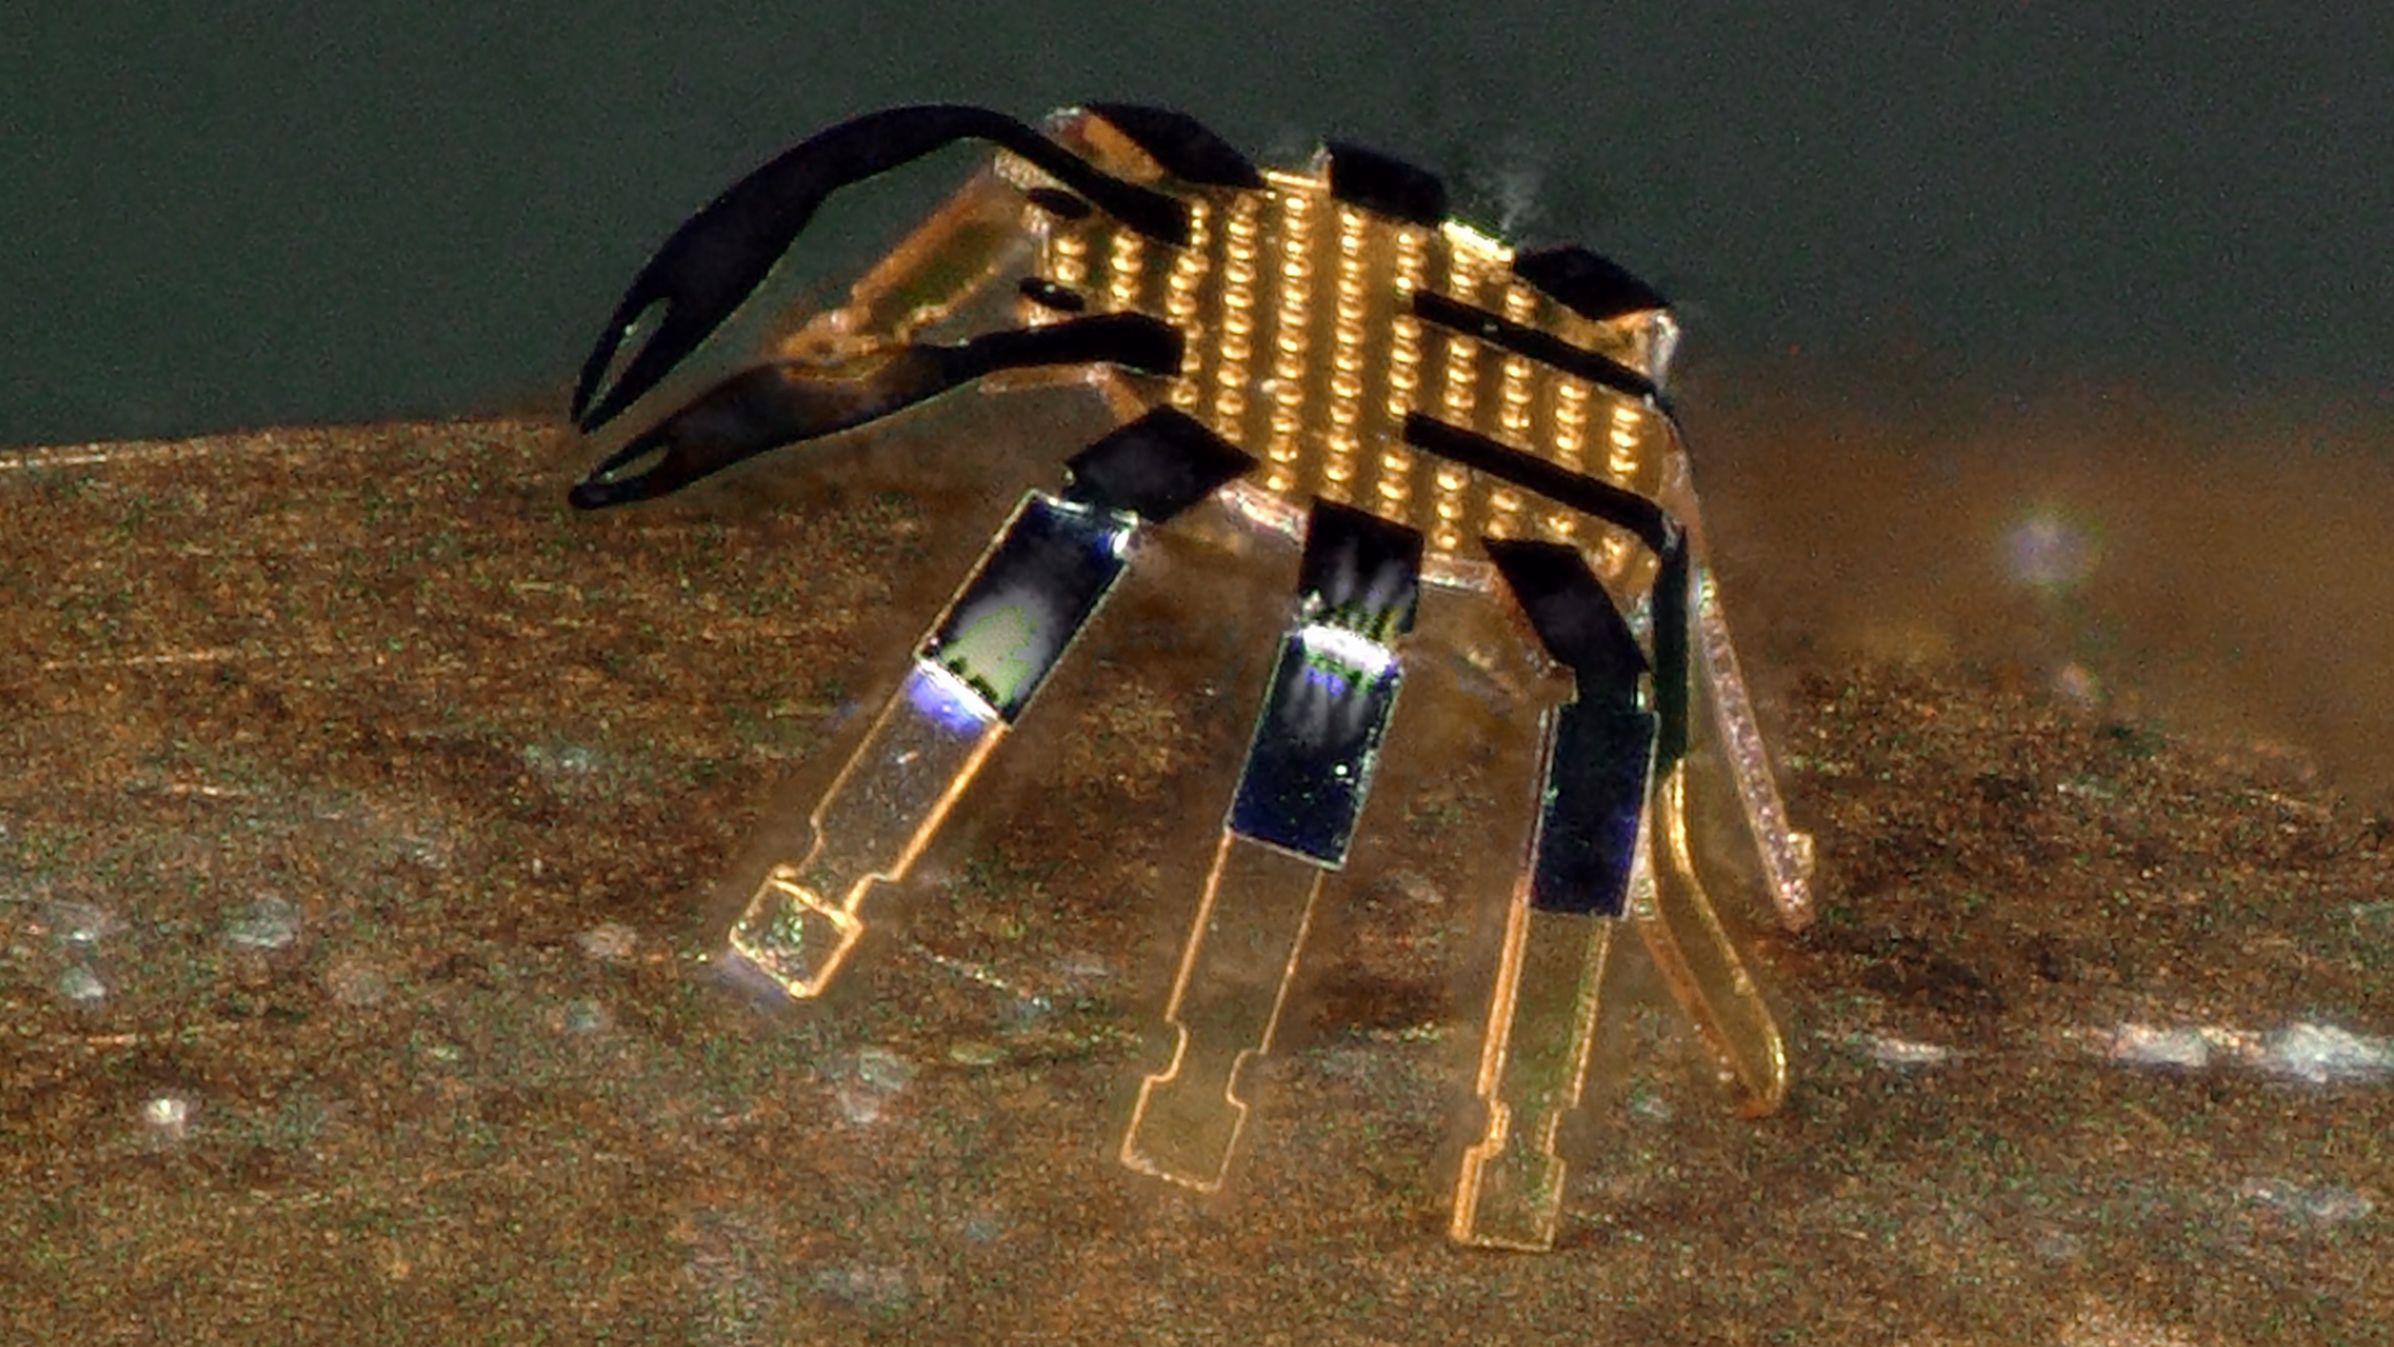 The world's smallest remote-controlled robot is able to move with the help of lasers. 